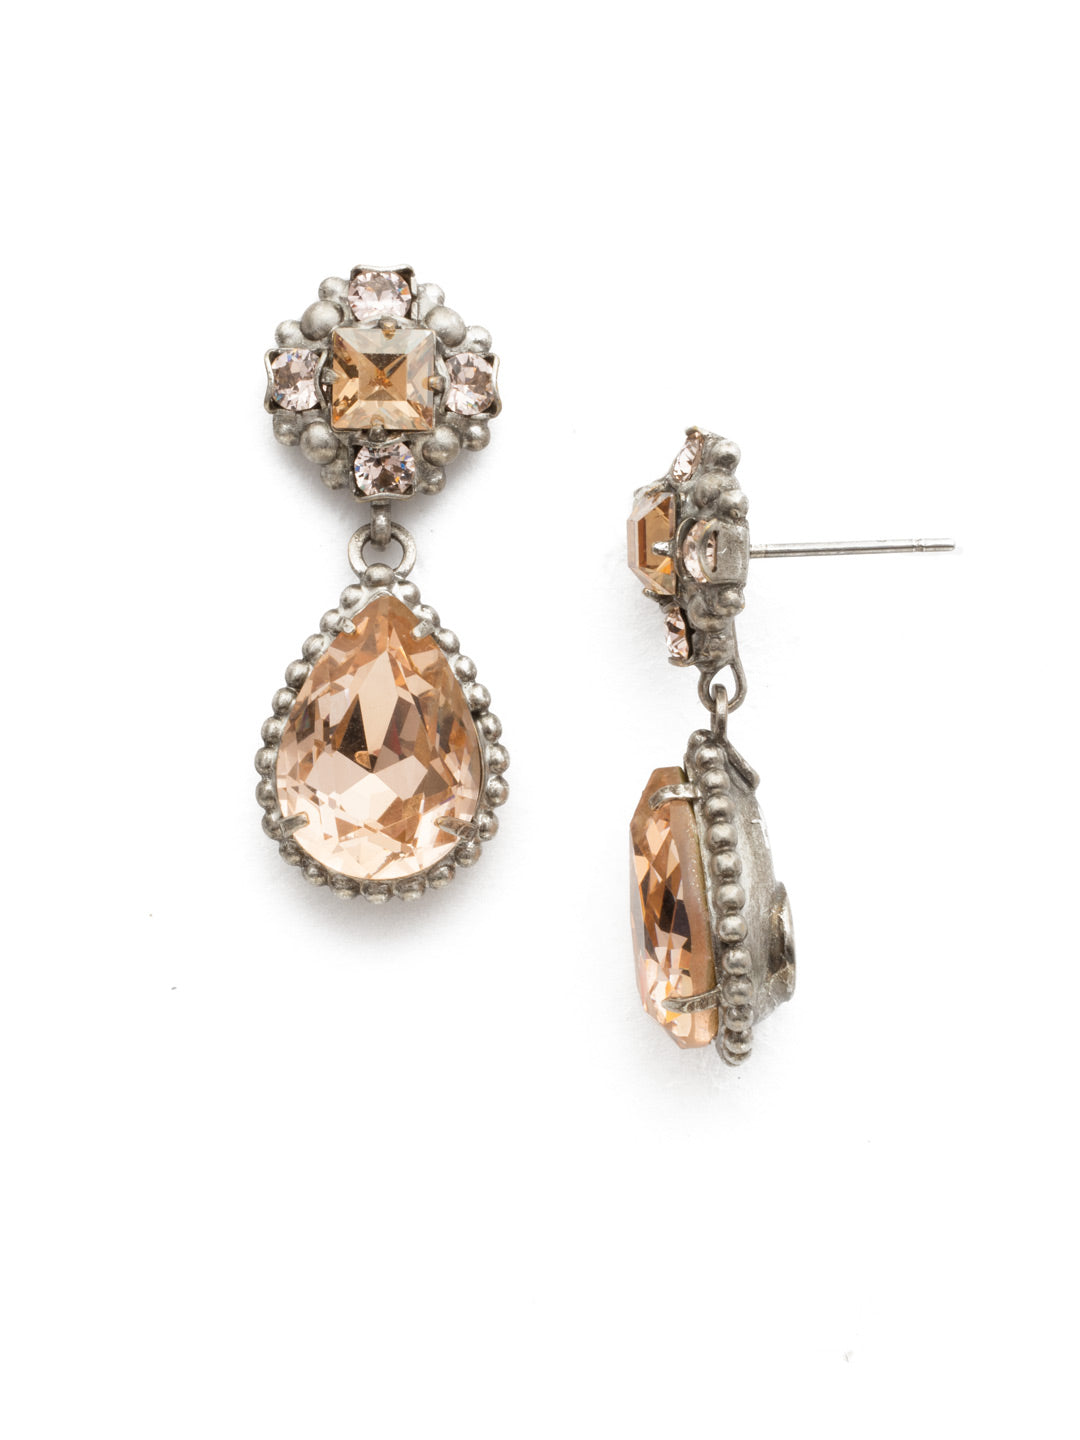 Posey Dangle Earrings - EDT8ASSBL - <p>Pear shaped crystals set in decorative edging alternate with vintage inspired crystal clusters for a unique design. From Sorrelli's Satin Blush collection in our Antique Silver-tone finish.</p>